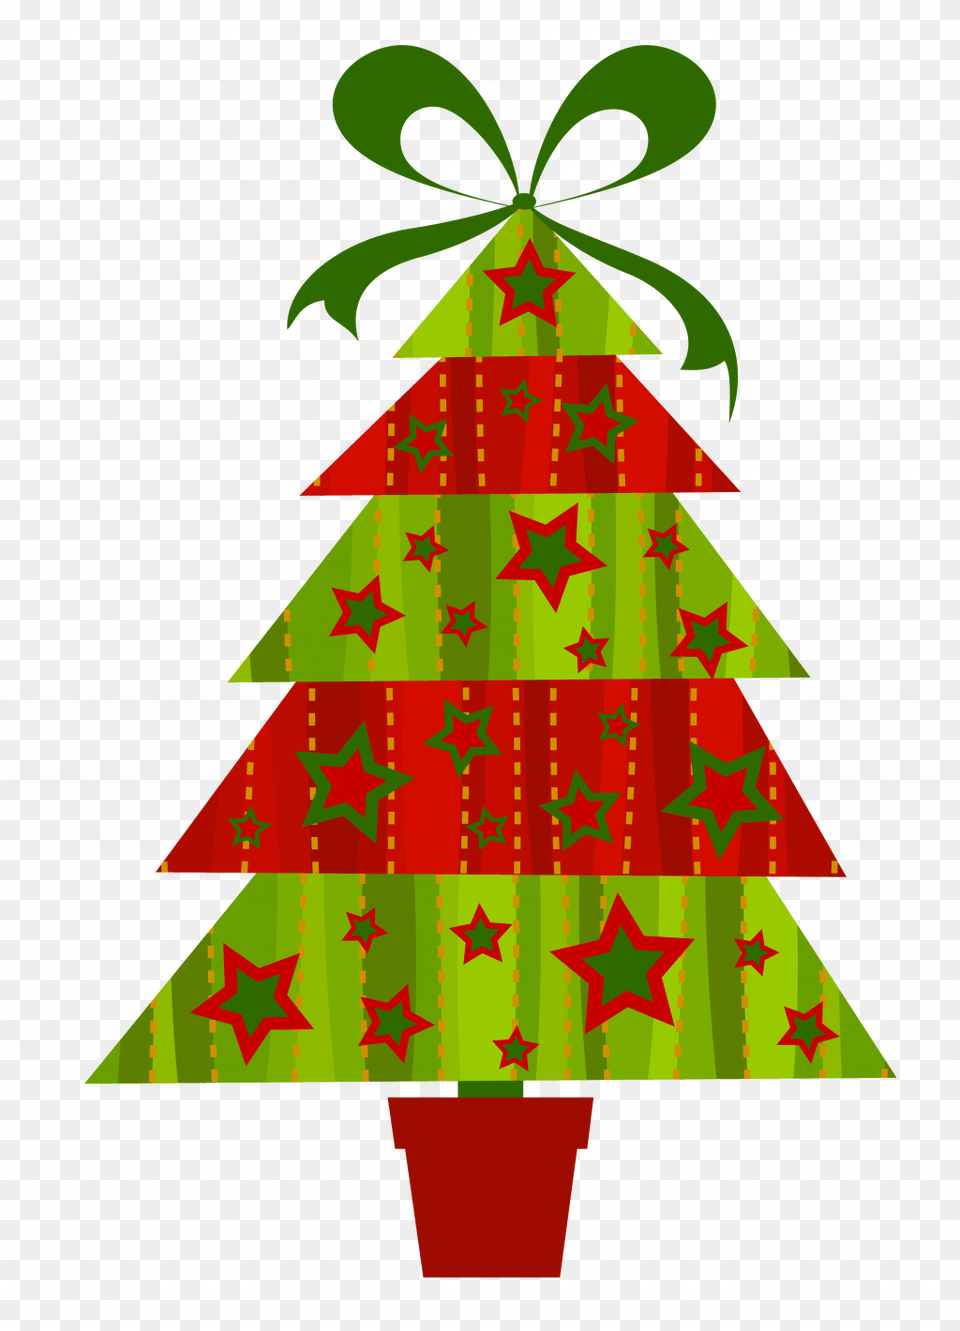 Christmas Tree Clip Art Clipart Of Amazing Star Topper Public Domain Christmas Clipart, Christmas Decorations, Festival, Christmas Tree Free Transparent Png